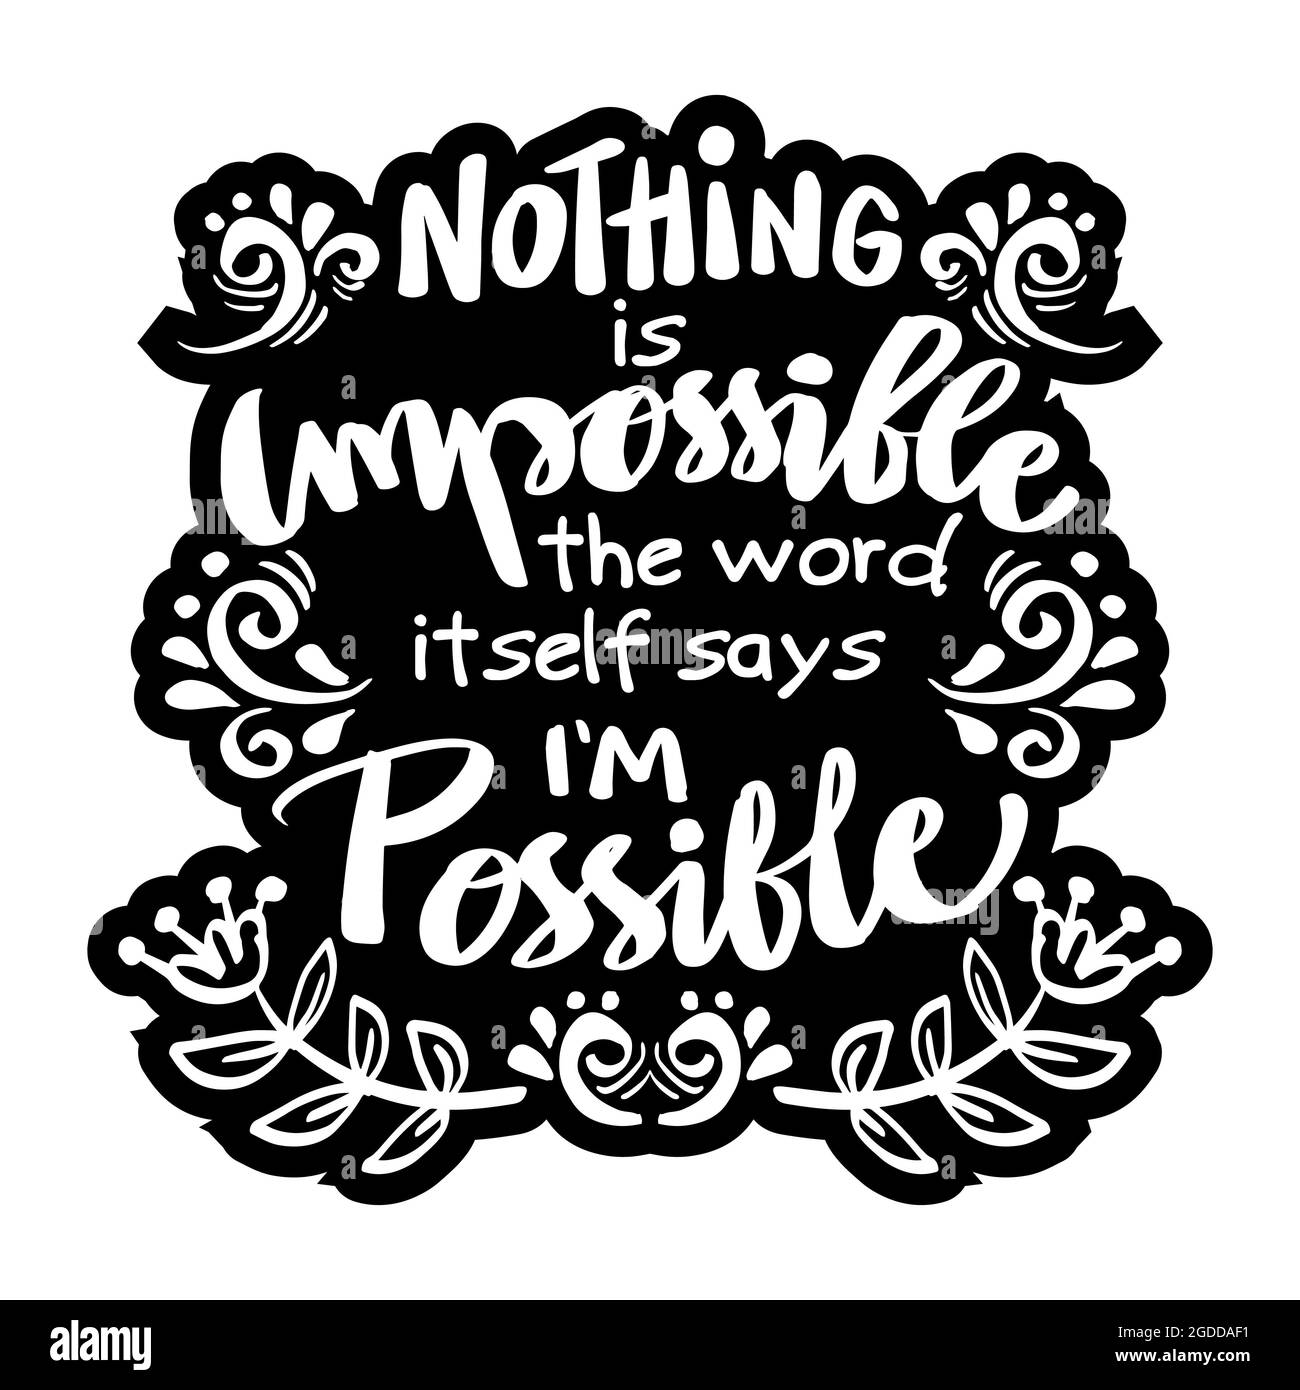 Nothing is impossible the word itself says i'm possible. Hand lettering motivational quote. Stock Photo